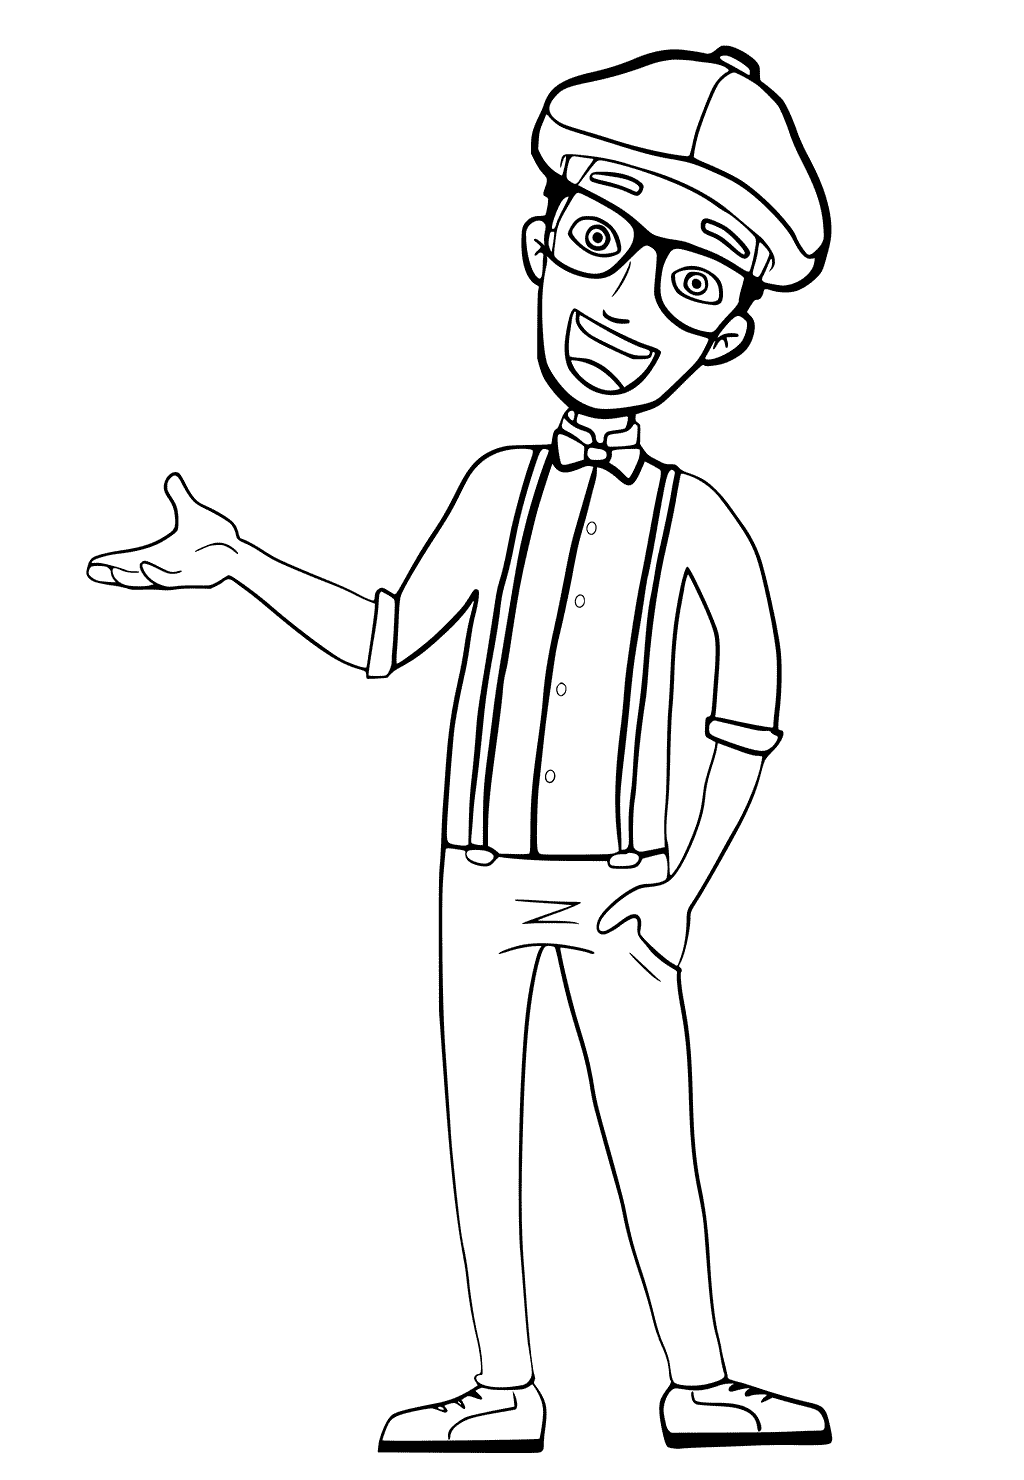 Blippi Coloring Pages Best Coloring Pages For Kids